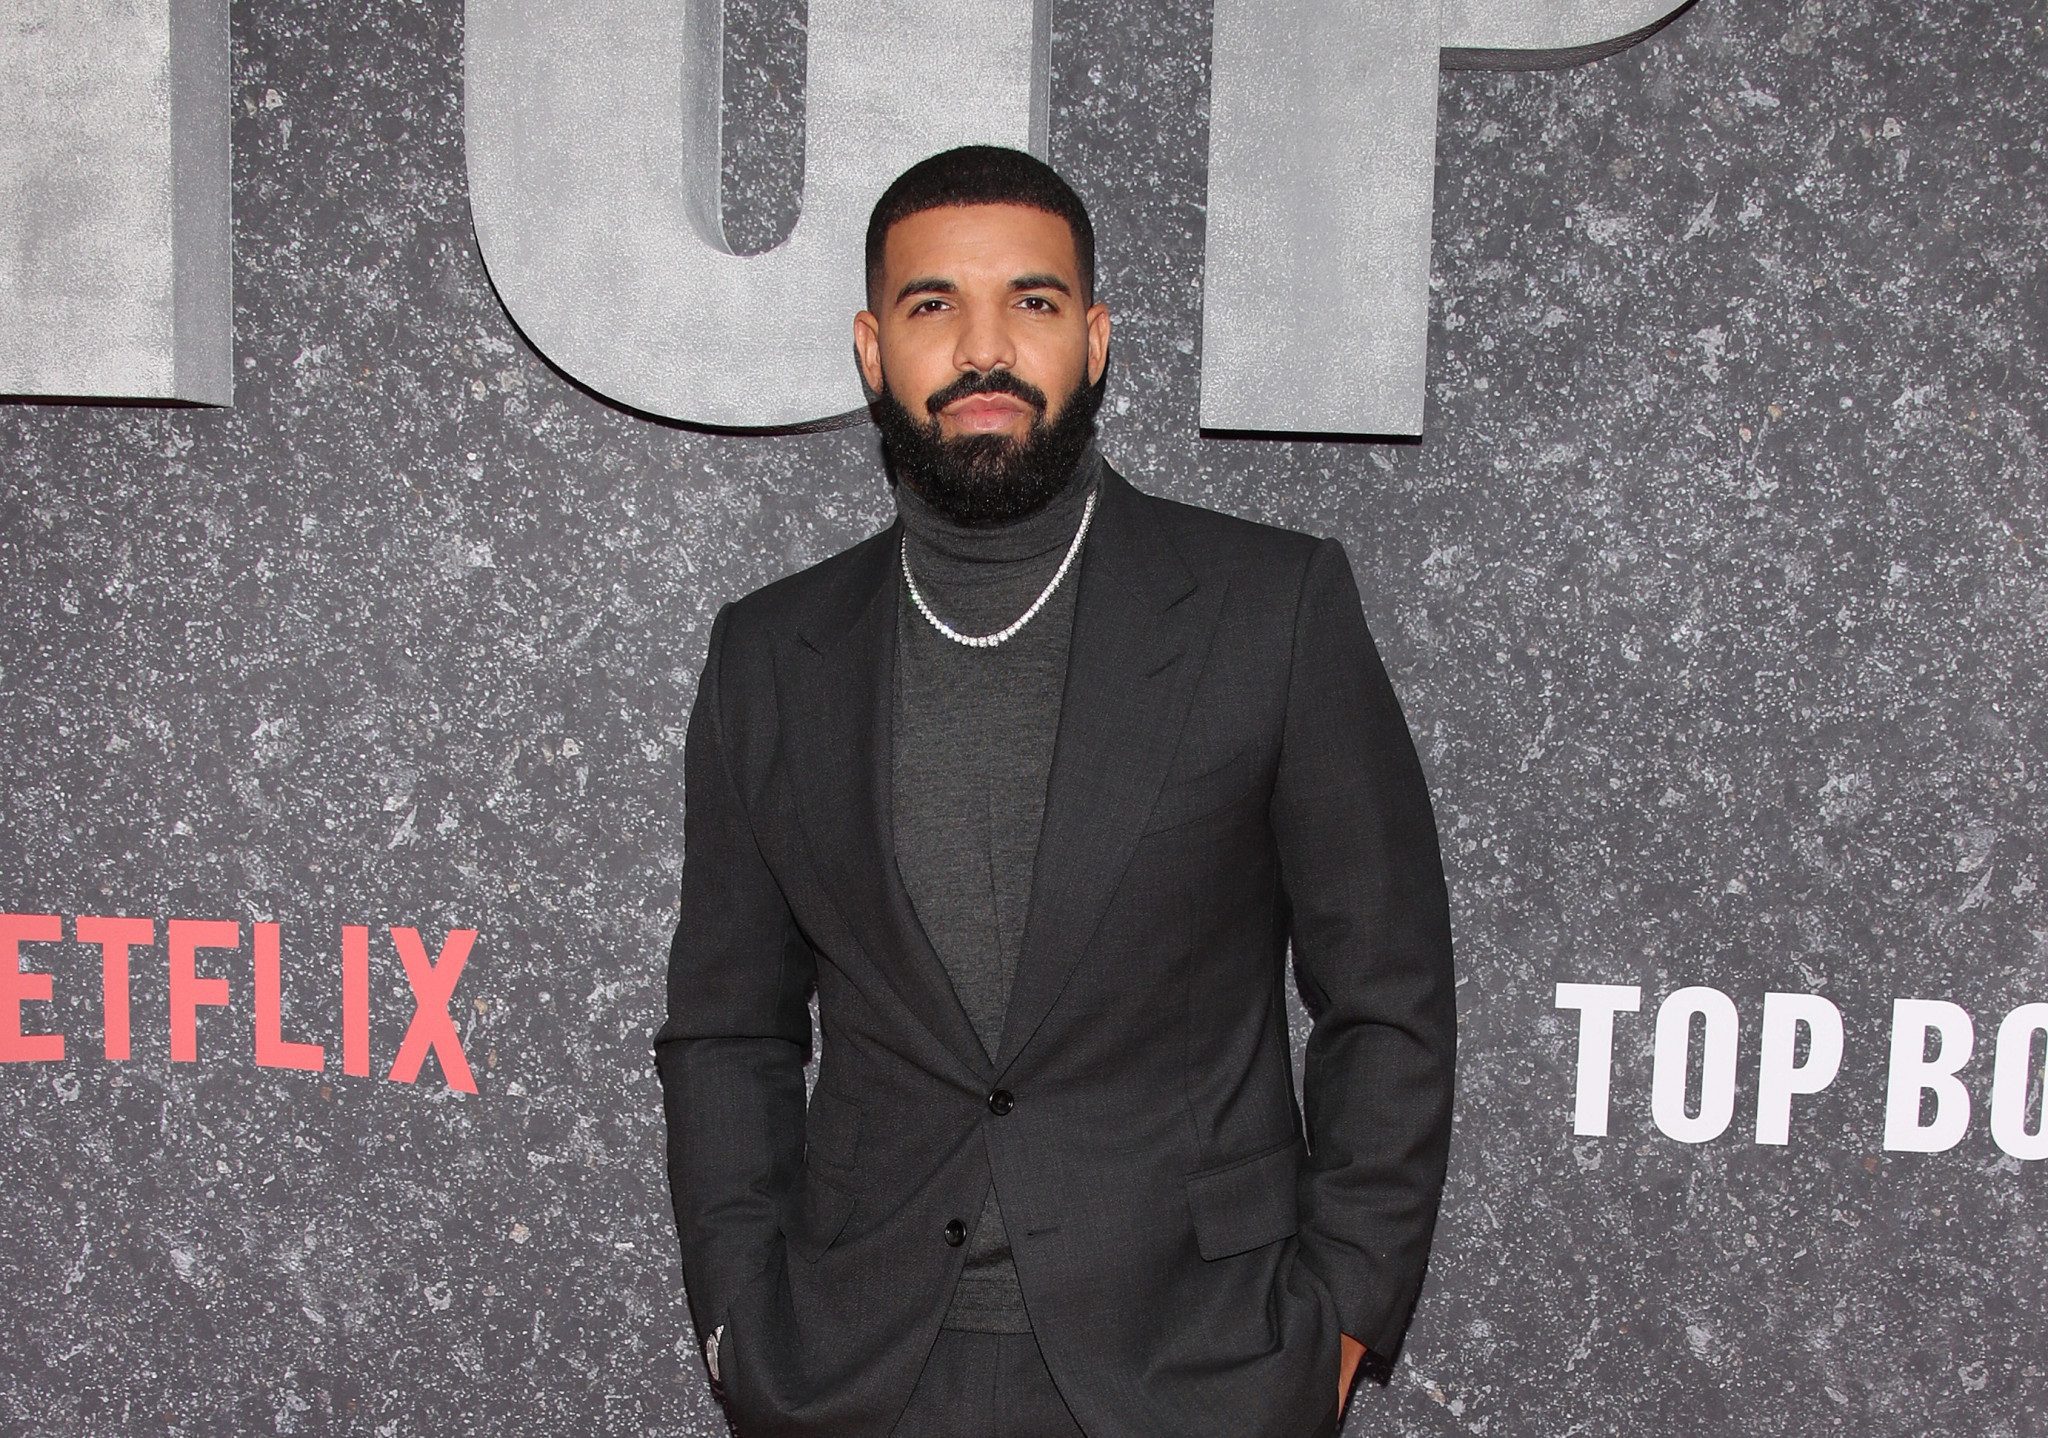 Drake planning 3-day music event in Toronto ahead of OVO Fest